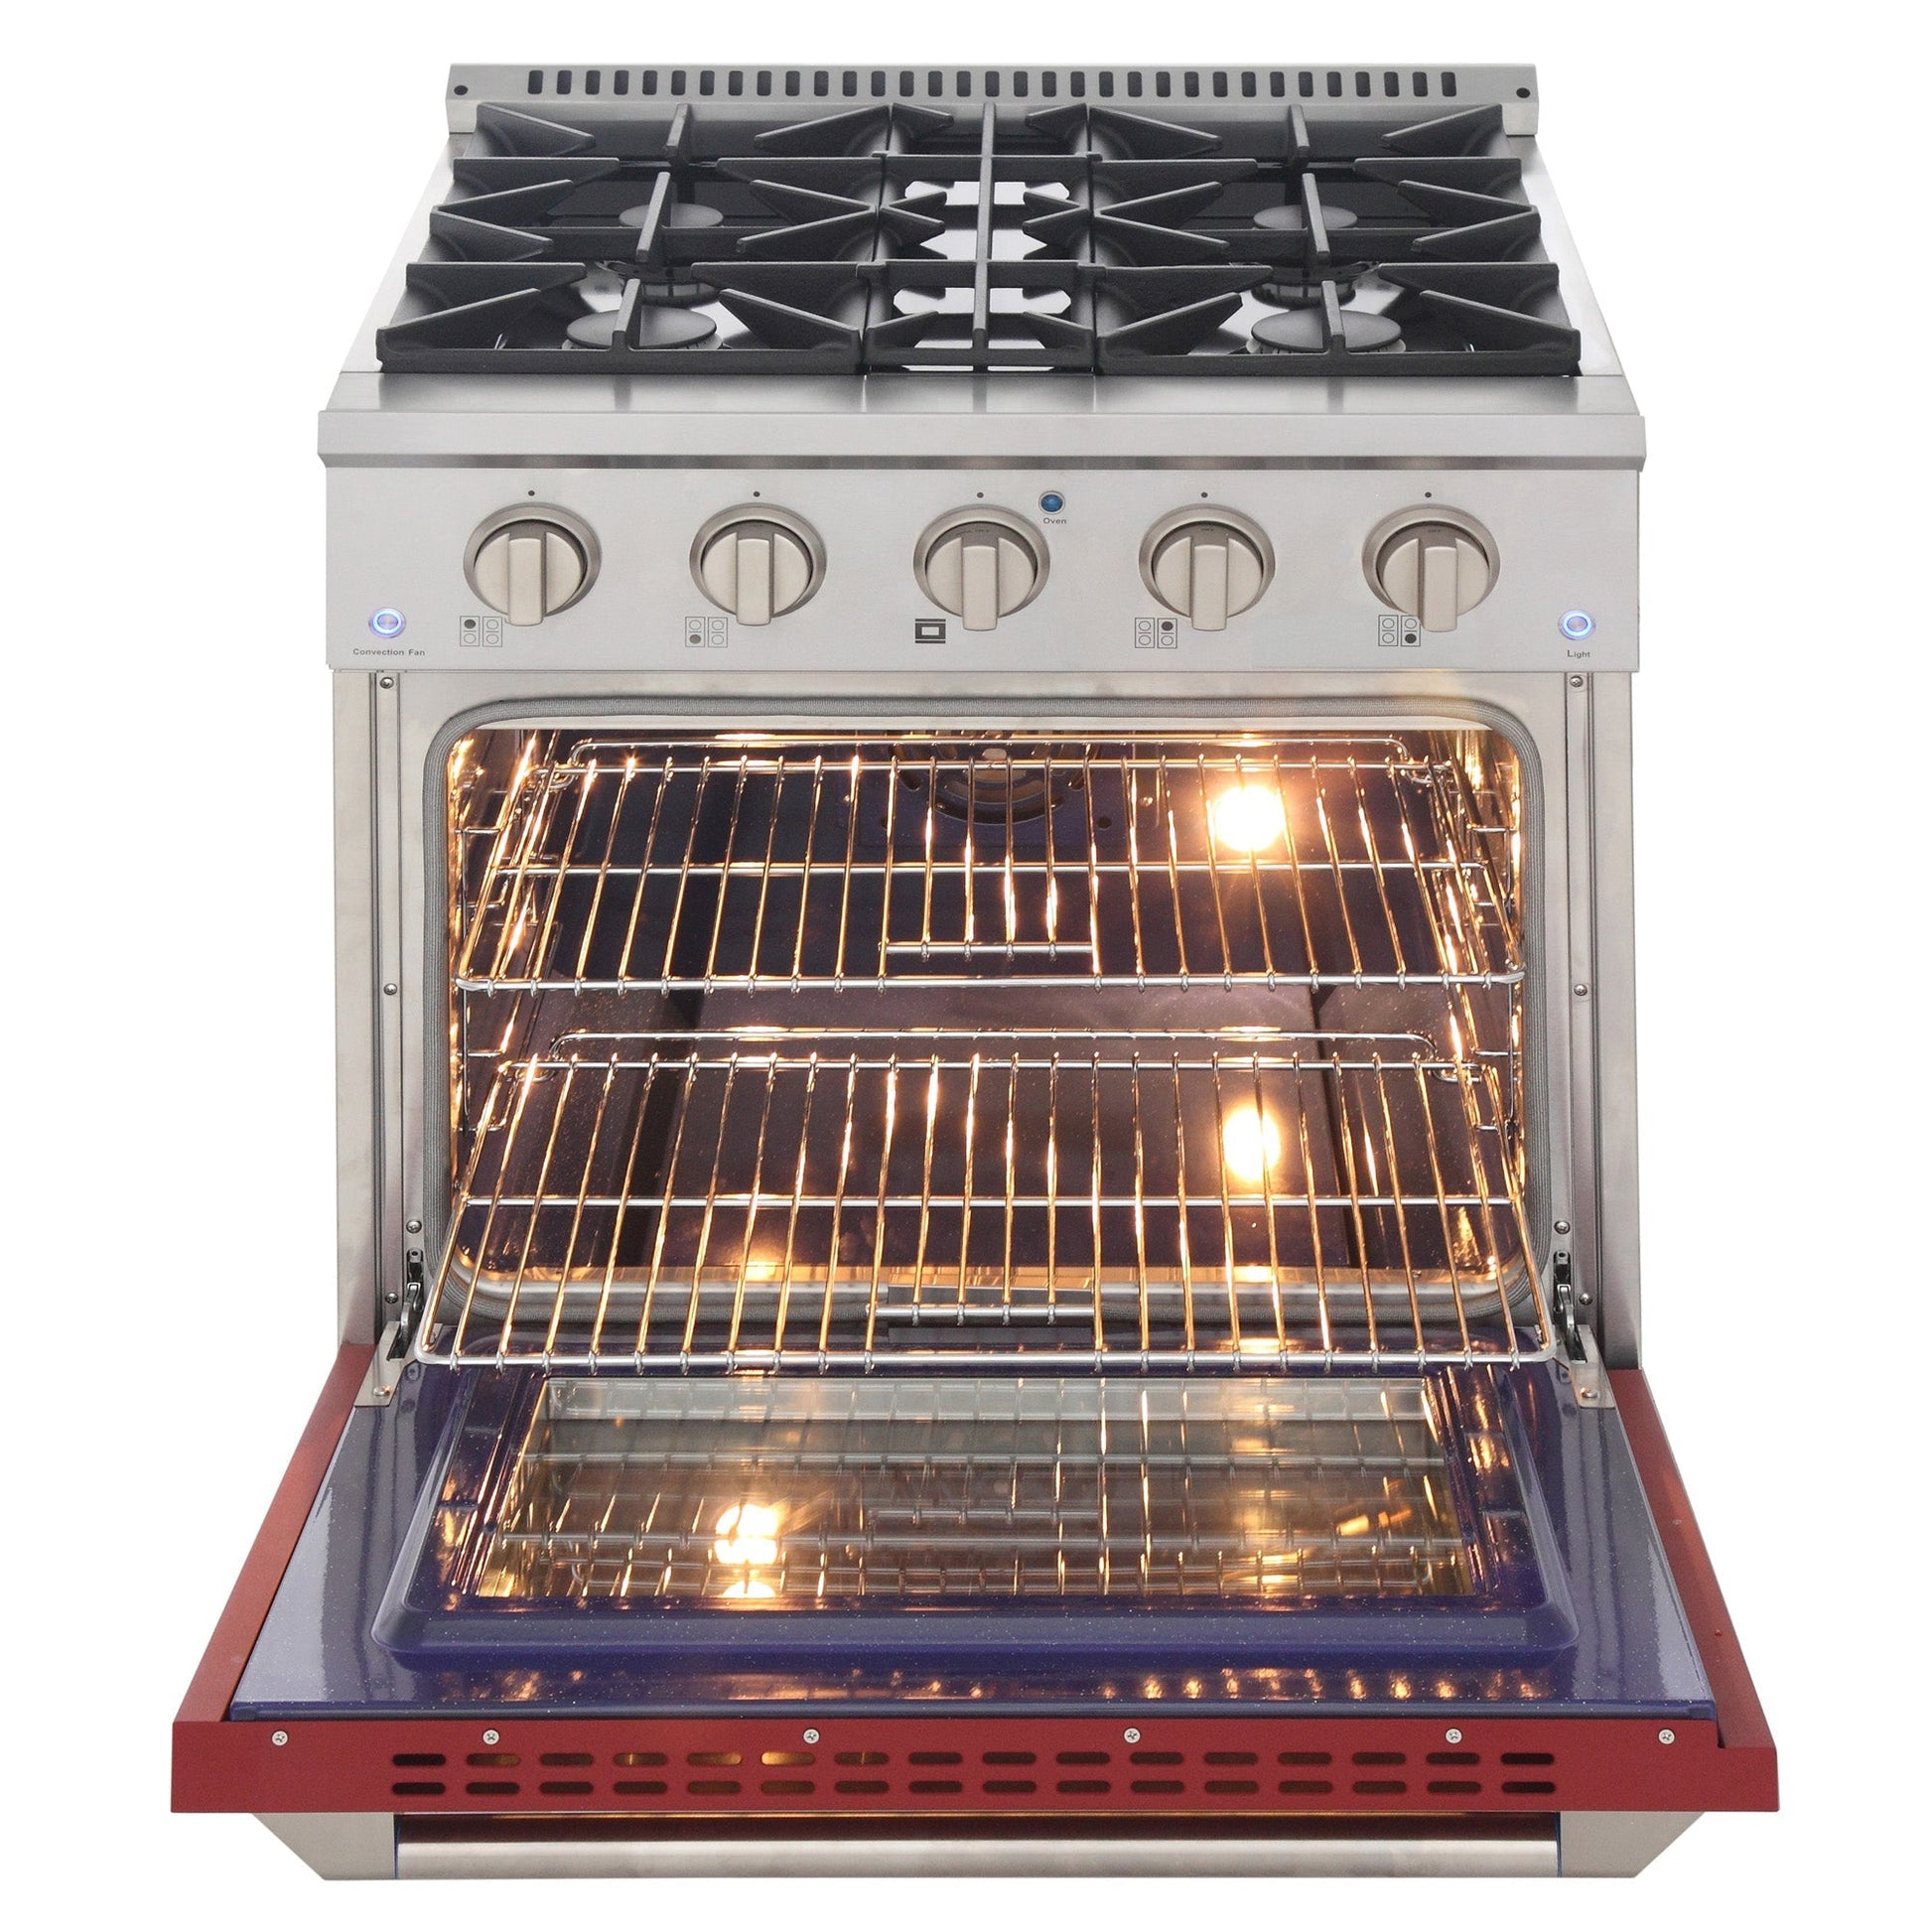 Kucht KDF Series 30" Red Freestanding Propane Gas Dual Fuel Range With 4 Burners